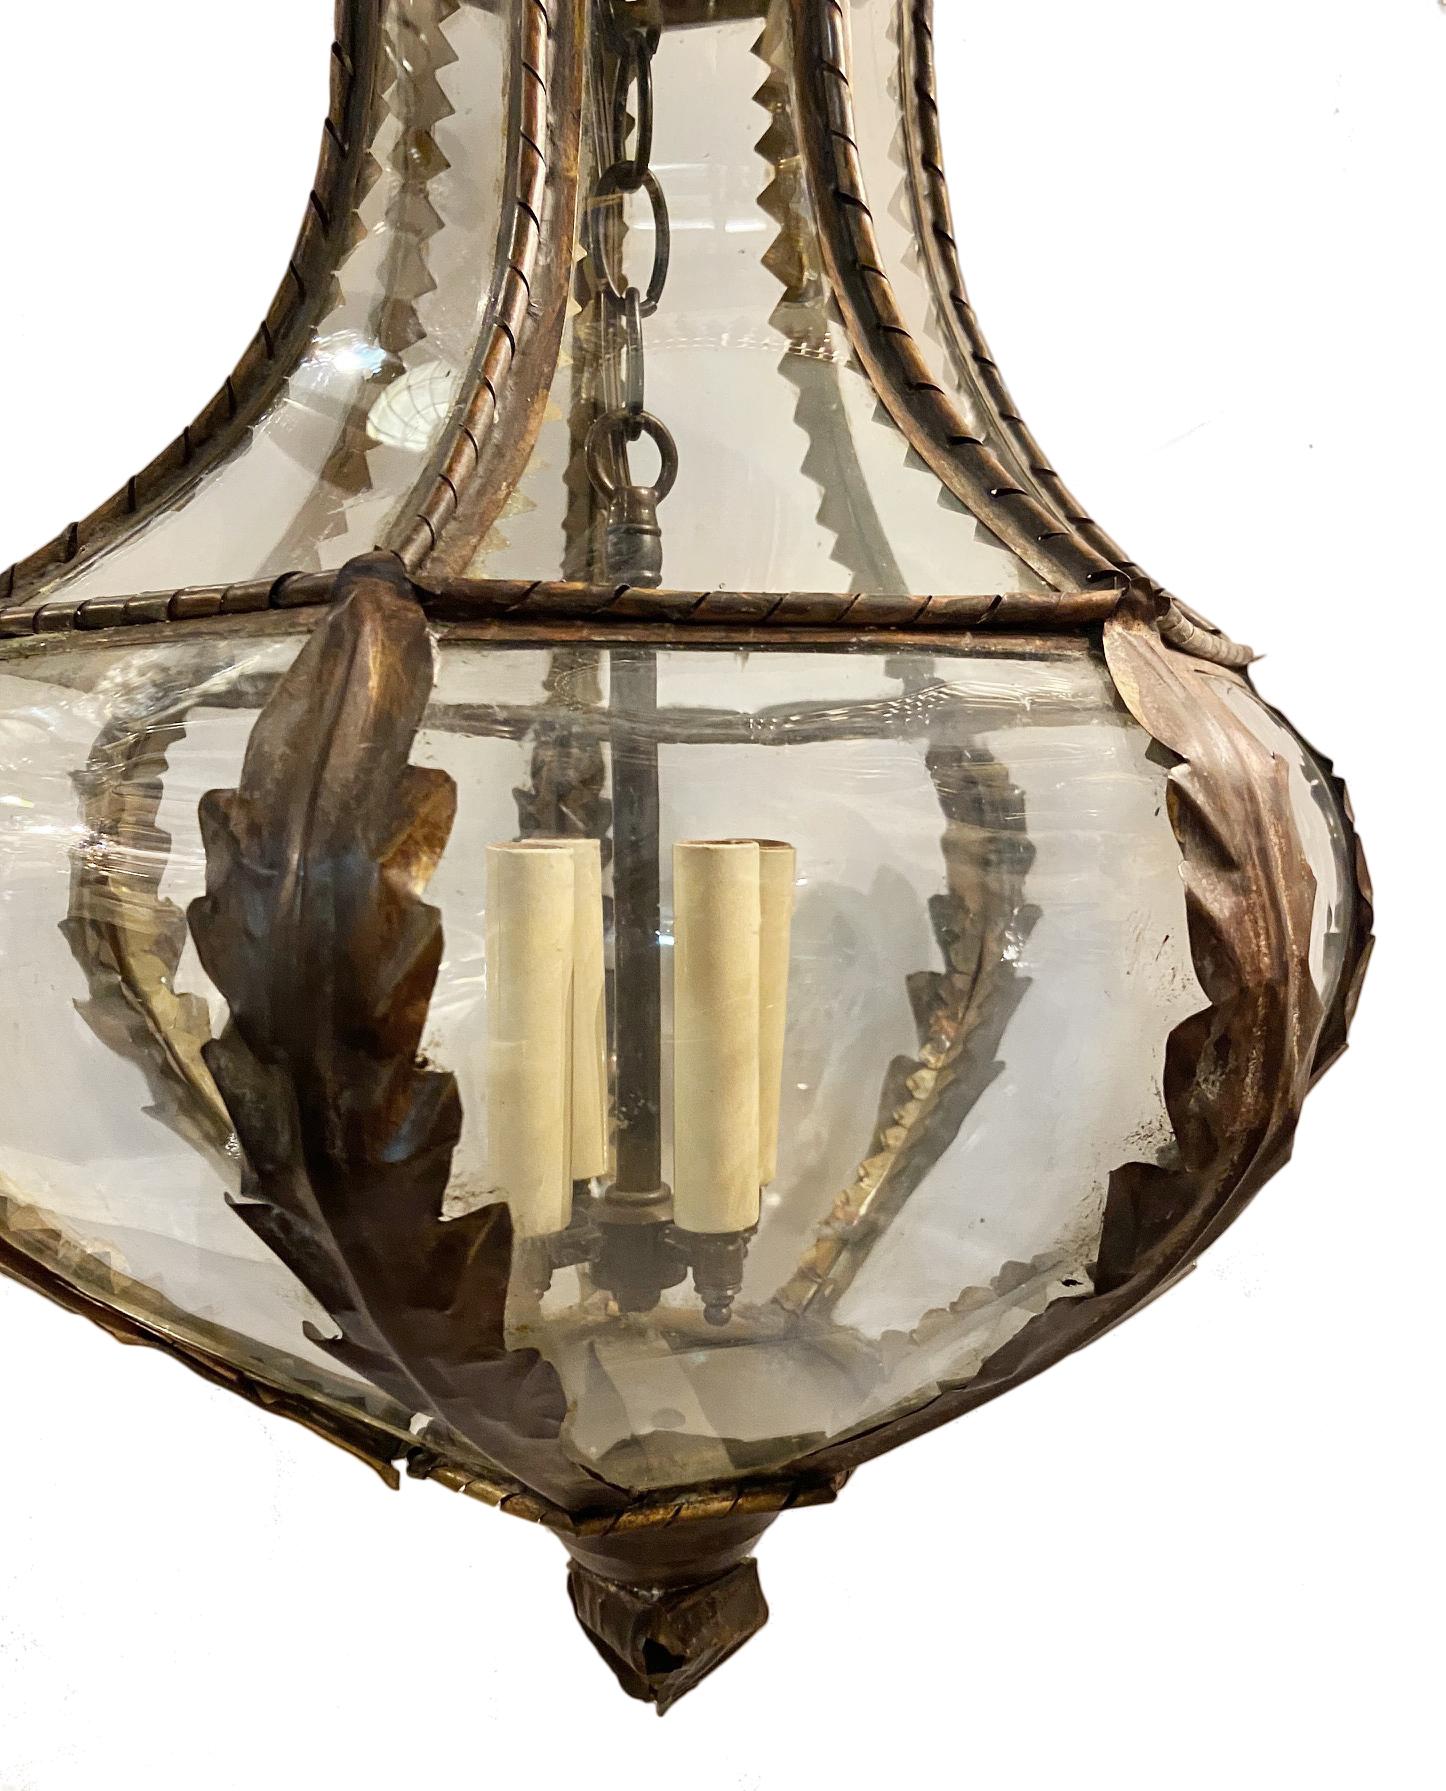 A set of four circa 1920s Italian metal lanterns with glass insets. Sold individually.

Measurements:
Height 30